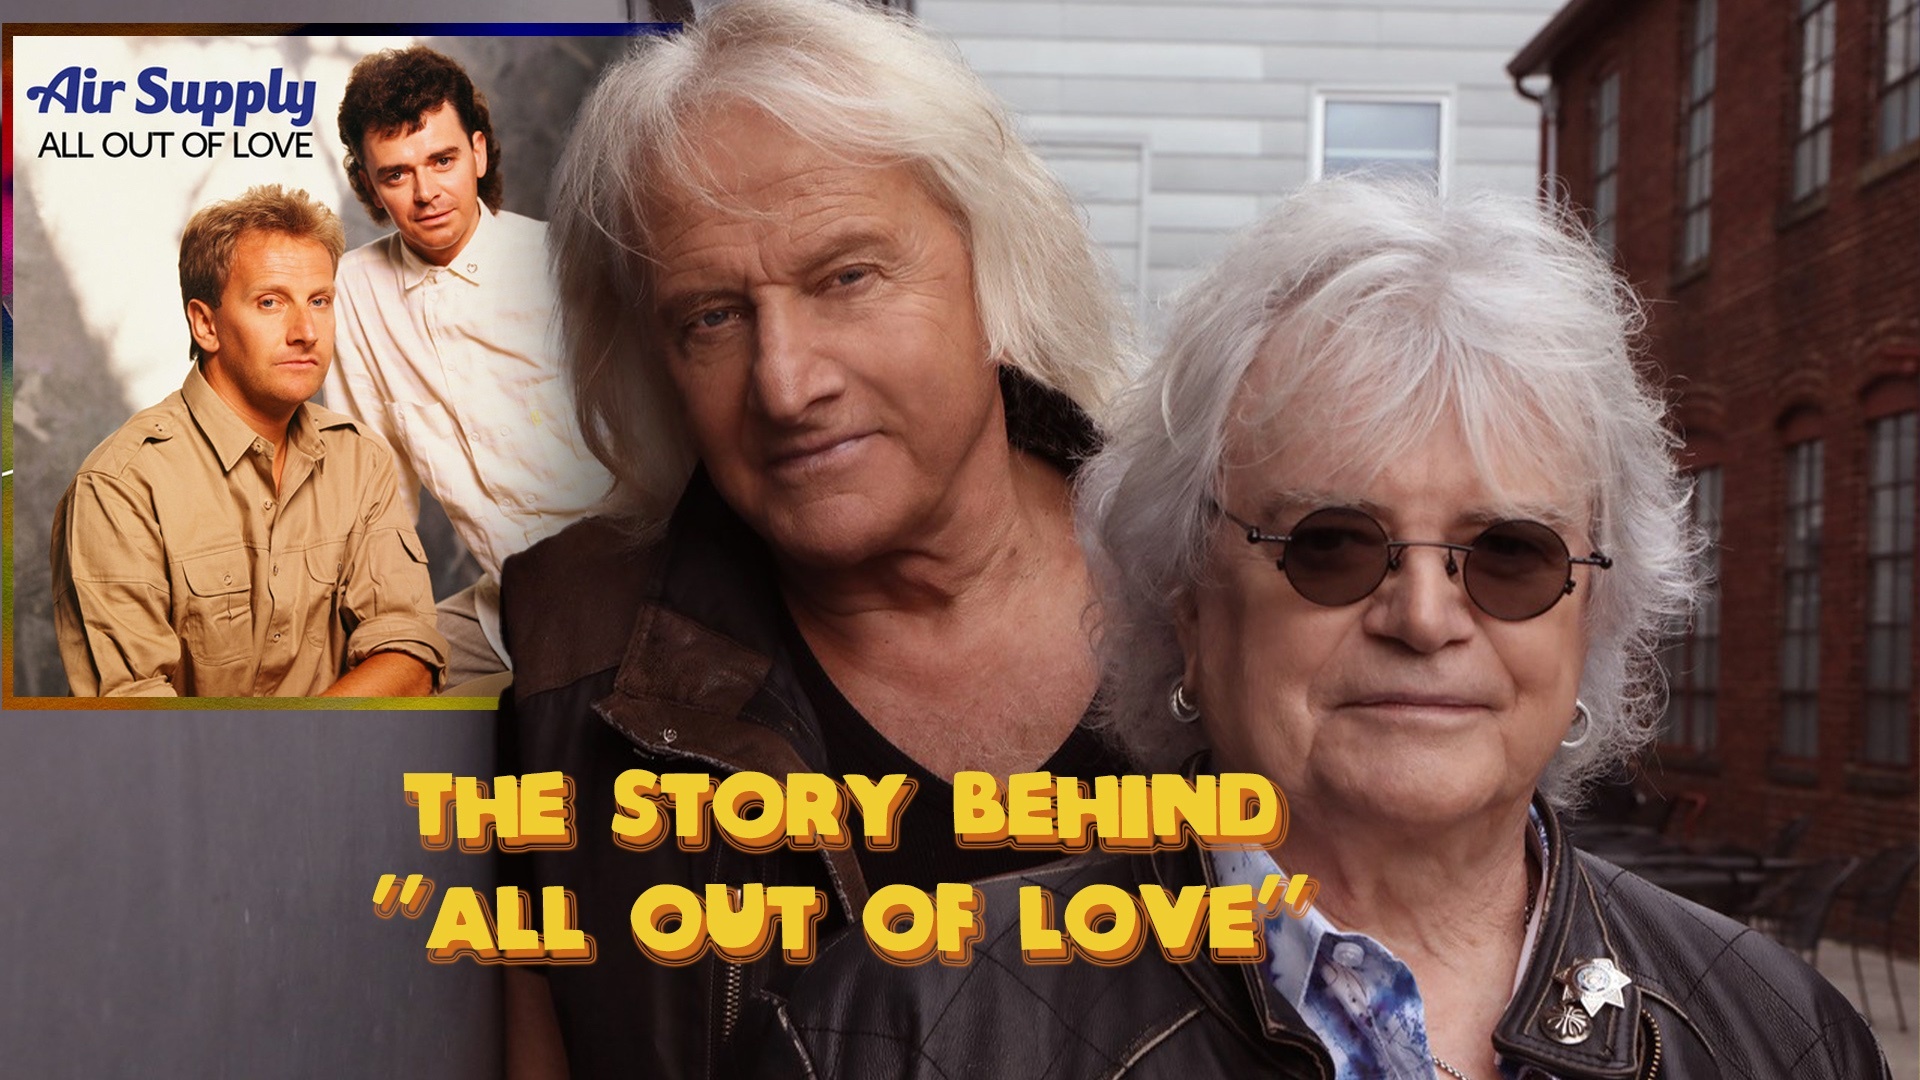 The Story Behind Air Supply’s “All Out of Love”